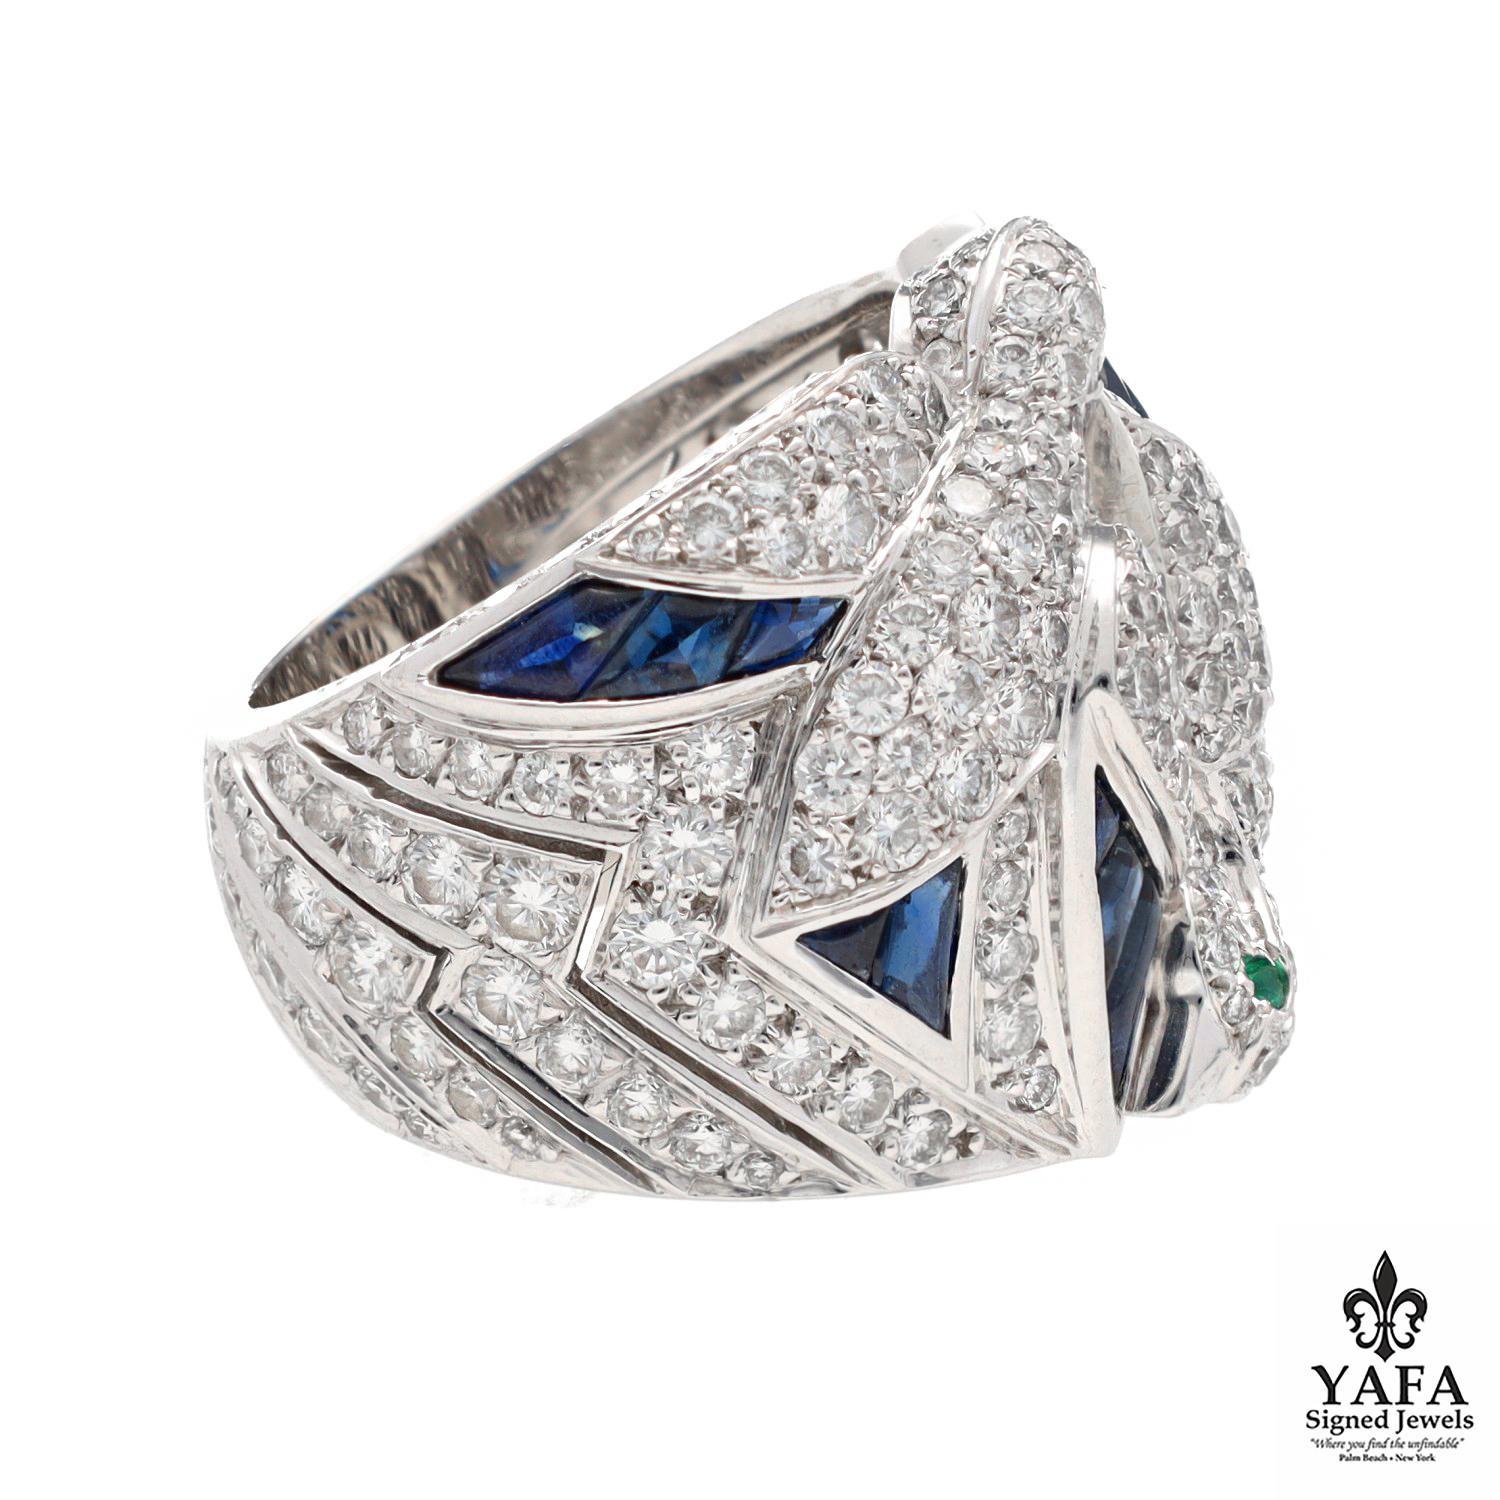 Depicting a Pair Of Birds in Flight, This Fanciful Ring is Set with Pave Diamonds and Accented with Buff-Top Calibre-Cut Sapphires and Round Emerald Eyes.

French Assay Marks
Signed - Cartier